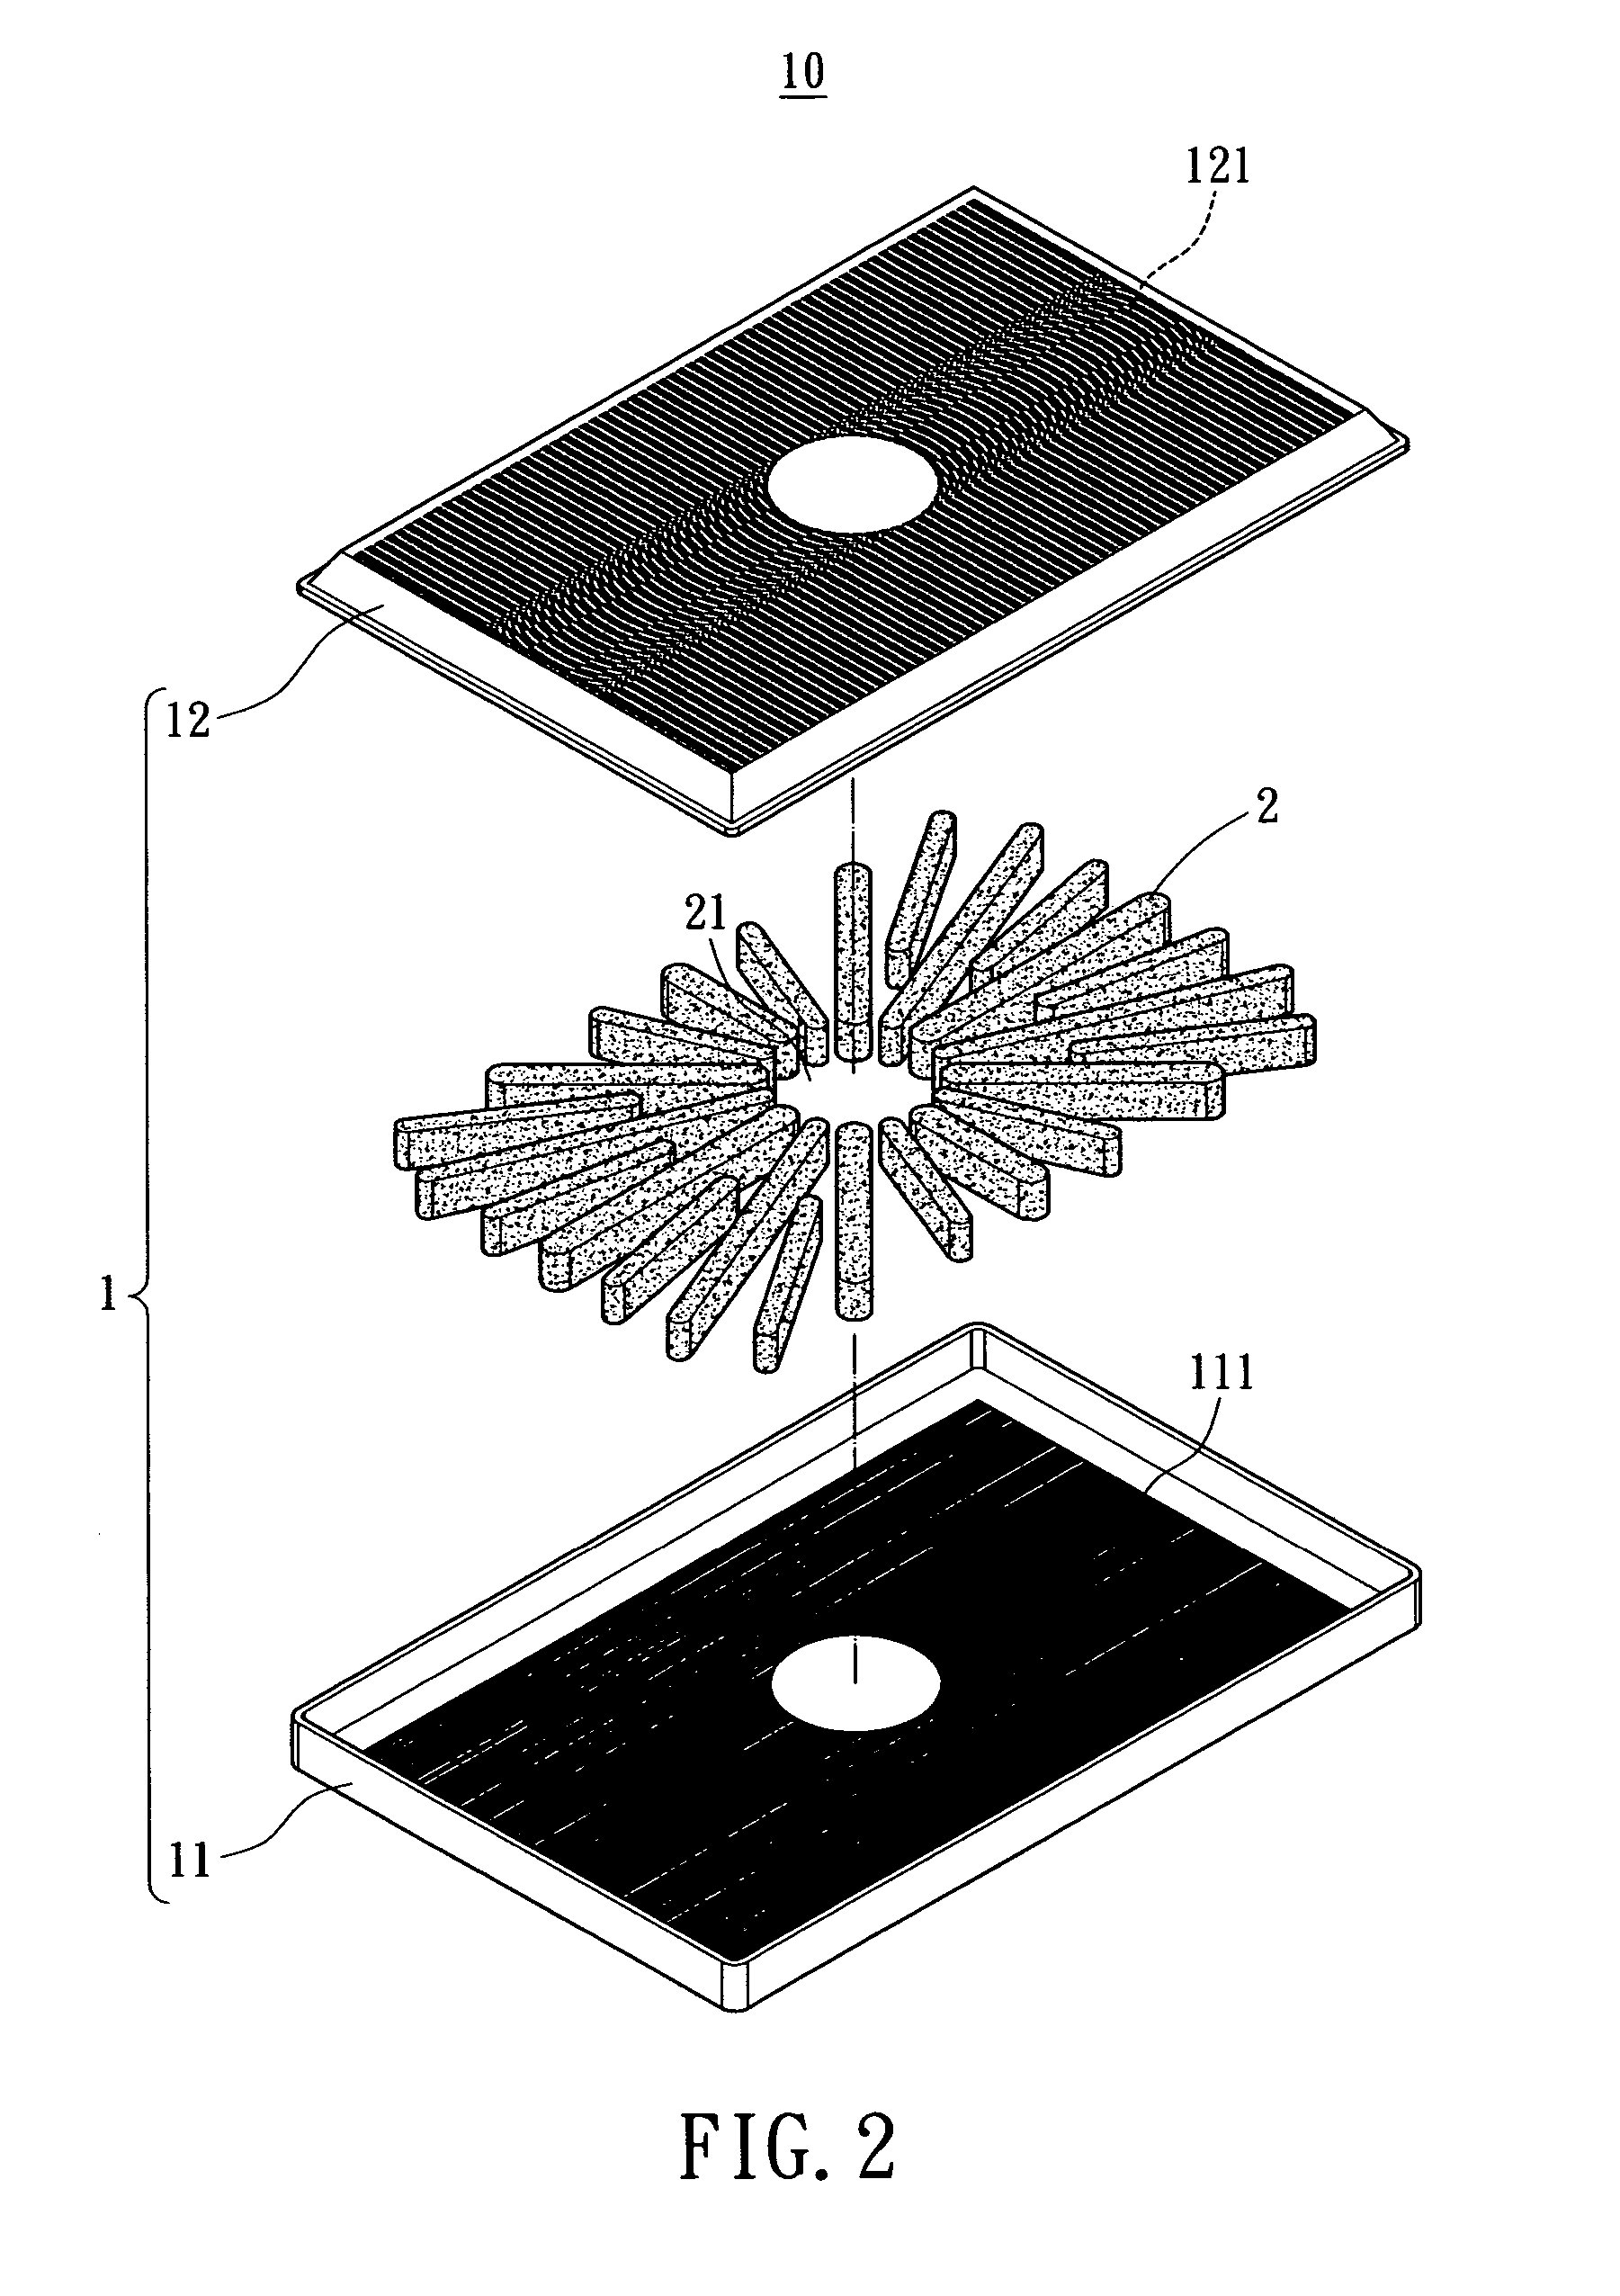 Structure of heat conductive plate